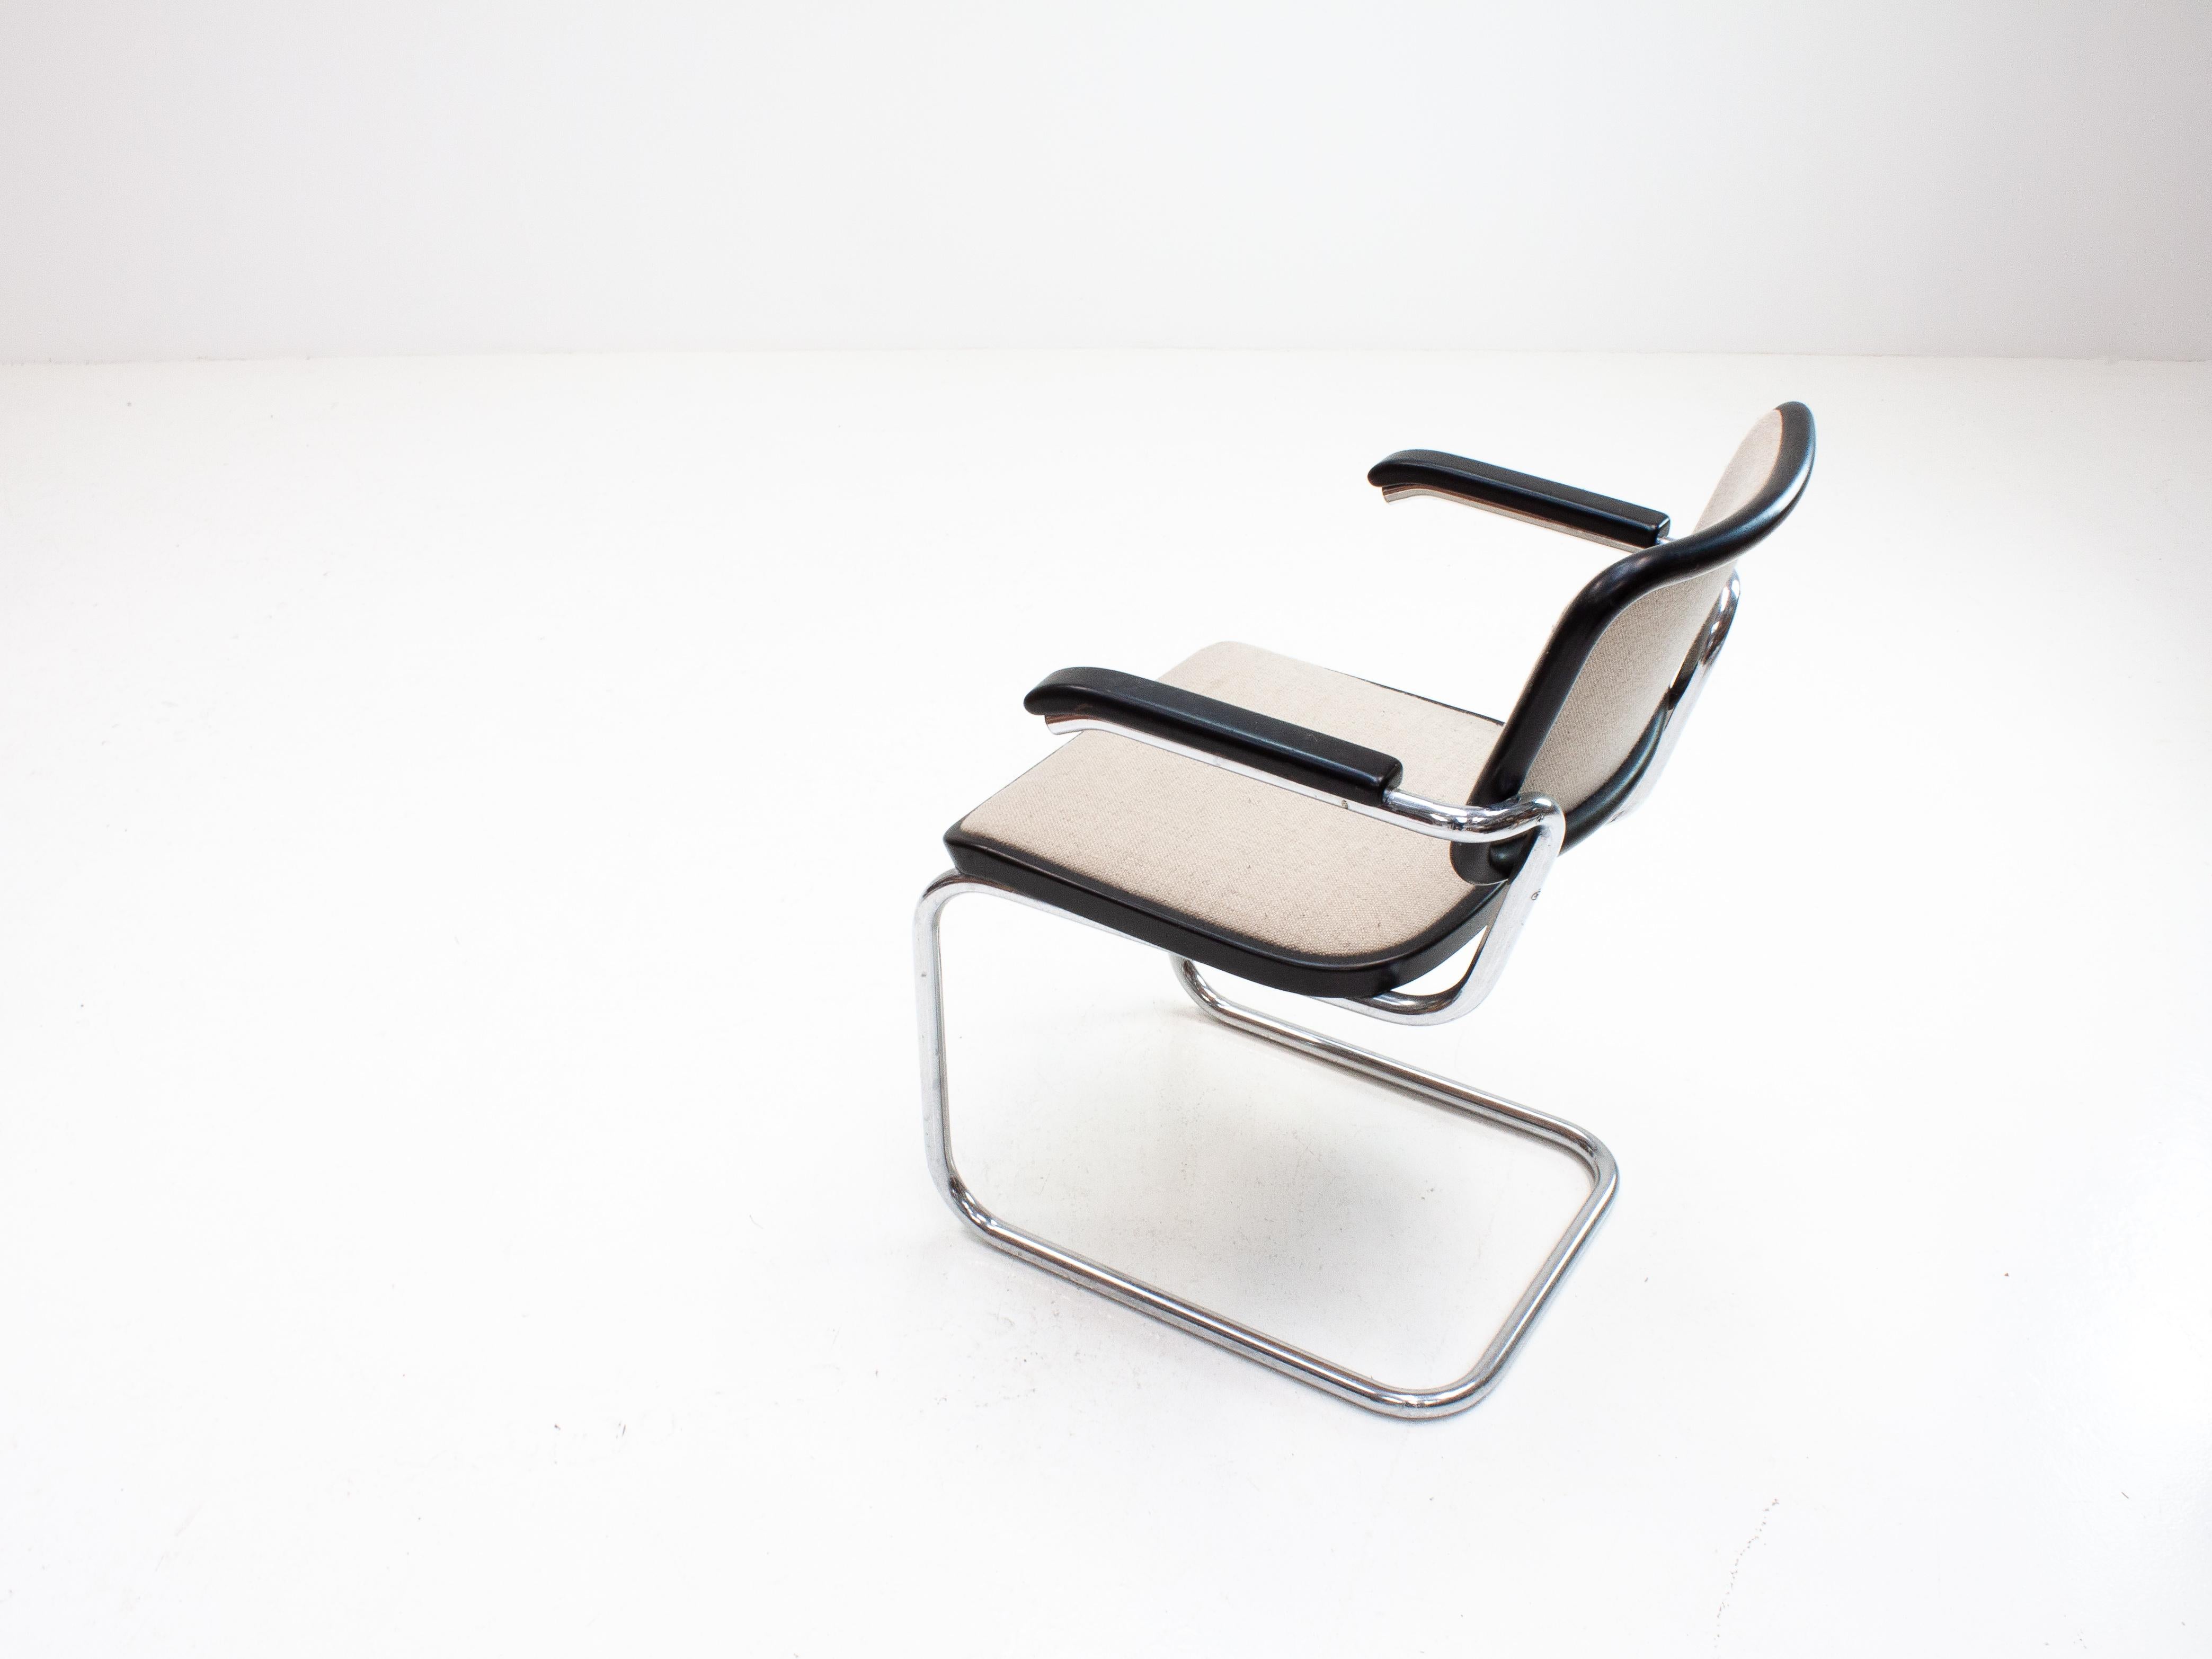 Marcel Breuer was a Hungarian-born modernist, architect and furniture designer.
 
This is one of his most iconic designs, the S64 consisting of a cantilevered tubular steel frame, black lacquered wood and material upholstery and this original